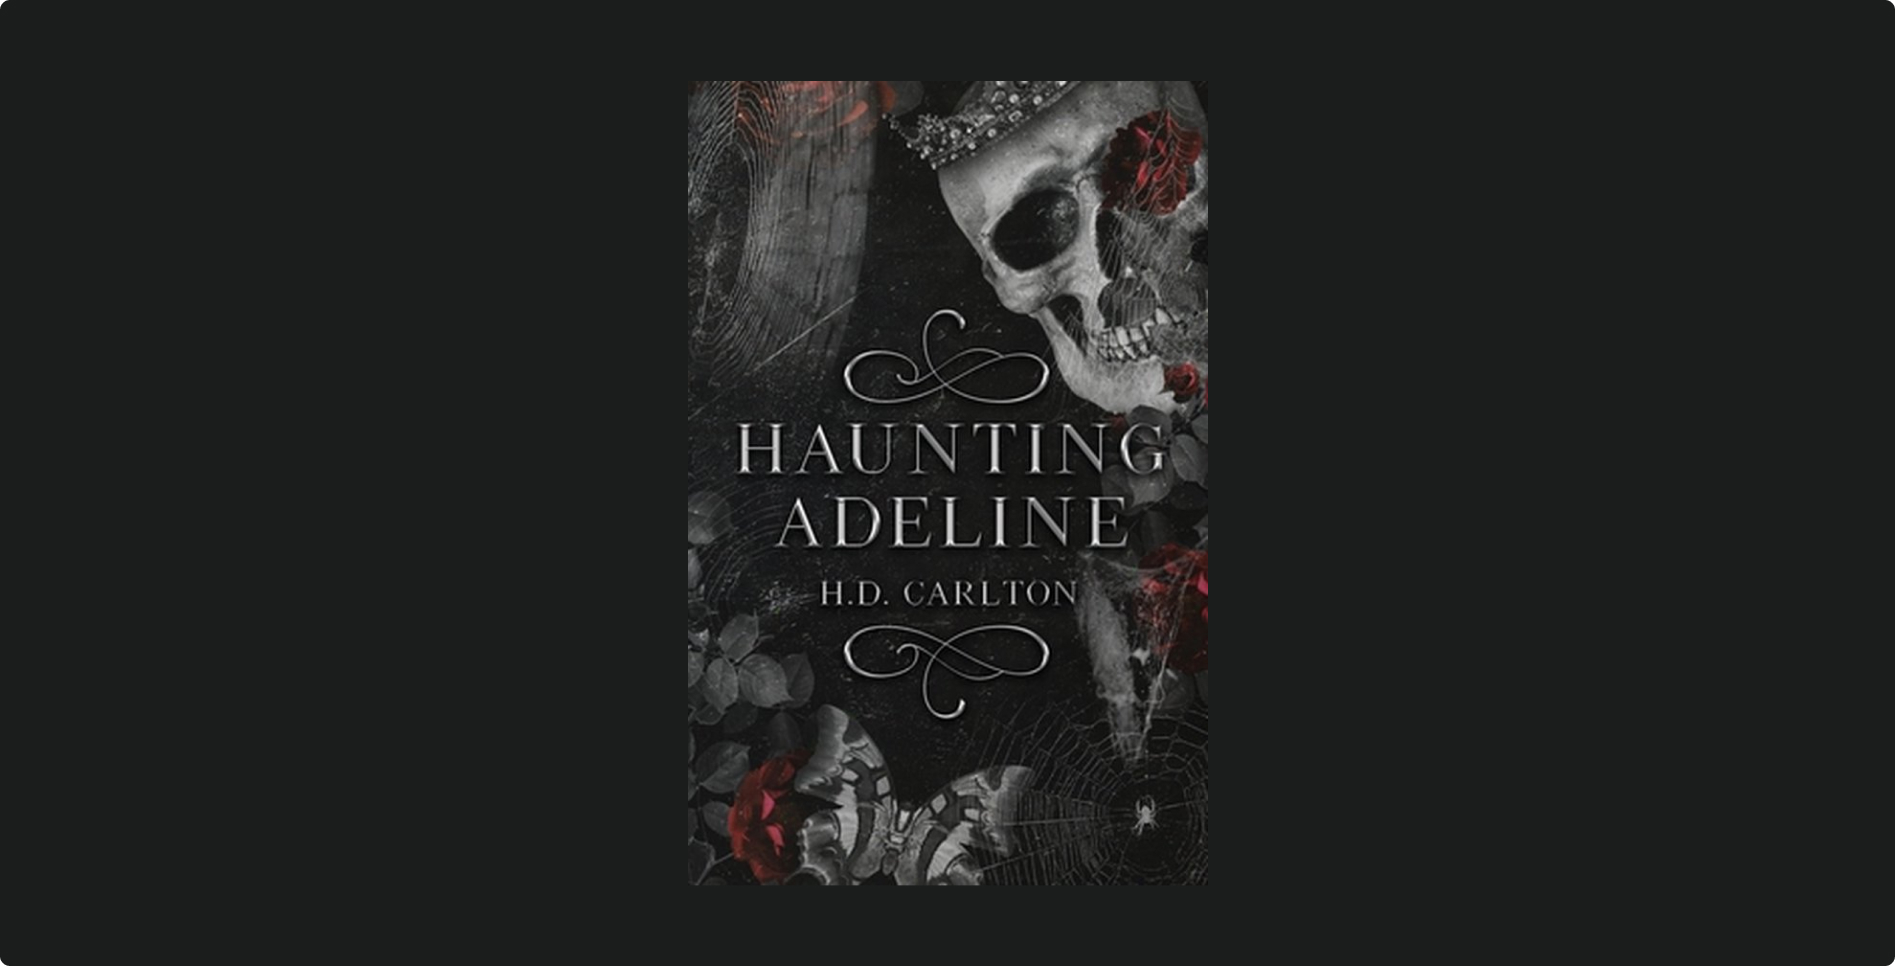 Haunting Adeline by H.D Carlton